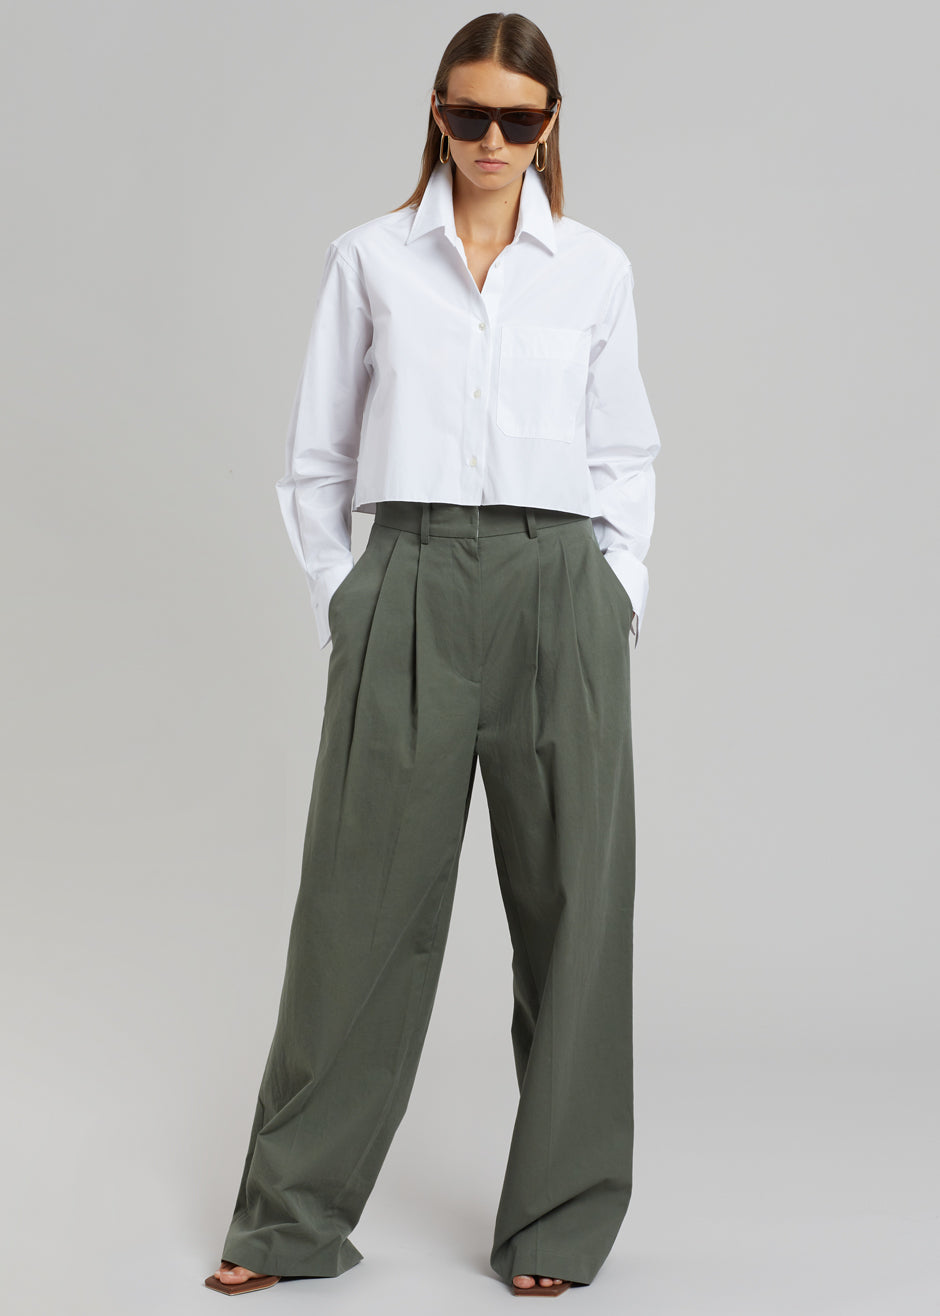 Tansy Cotton Pants - Olive - 1